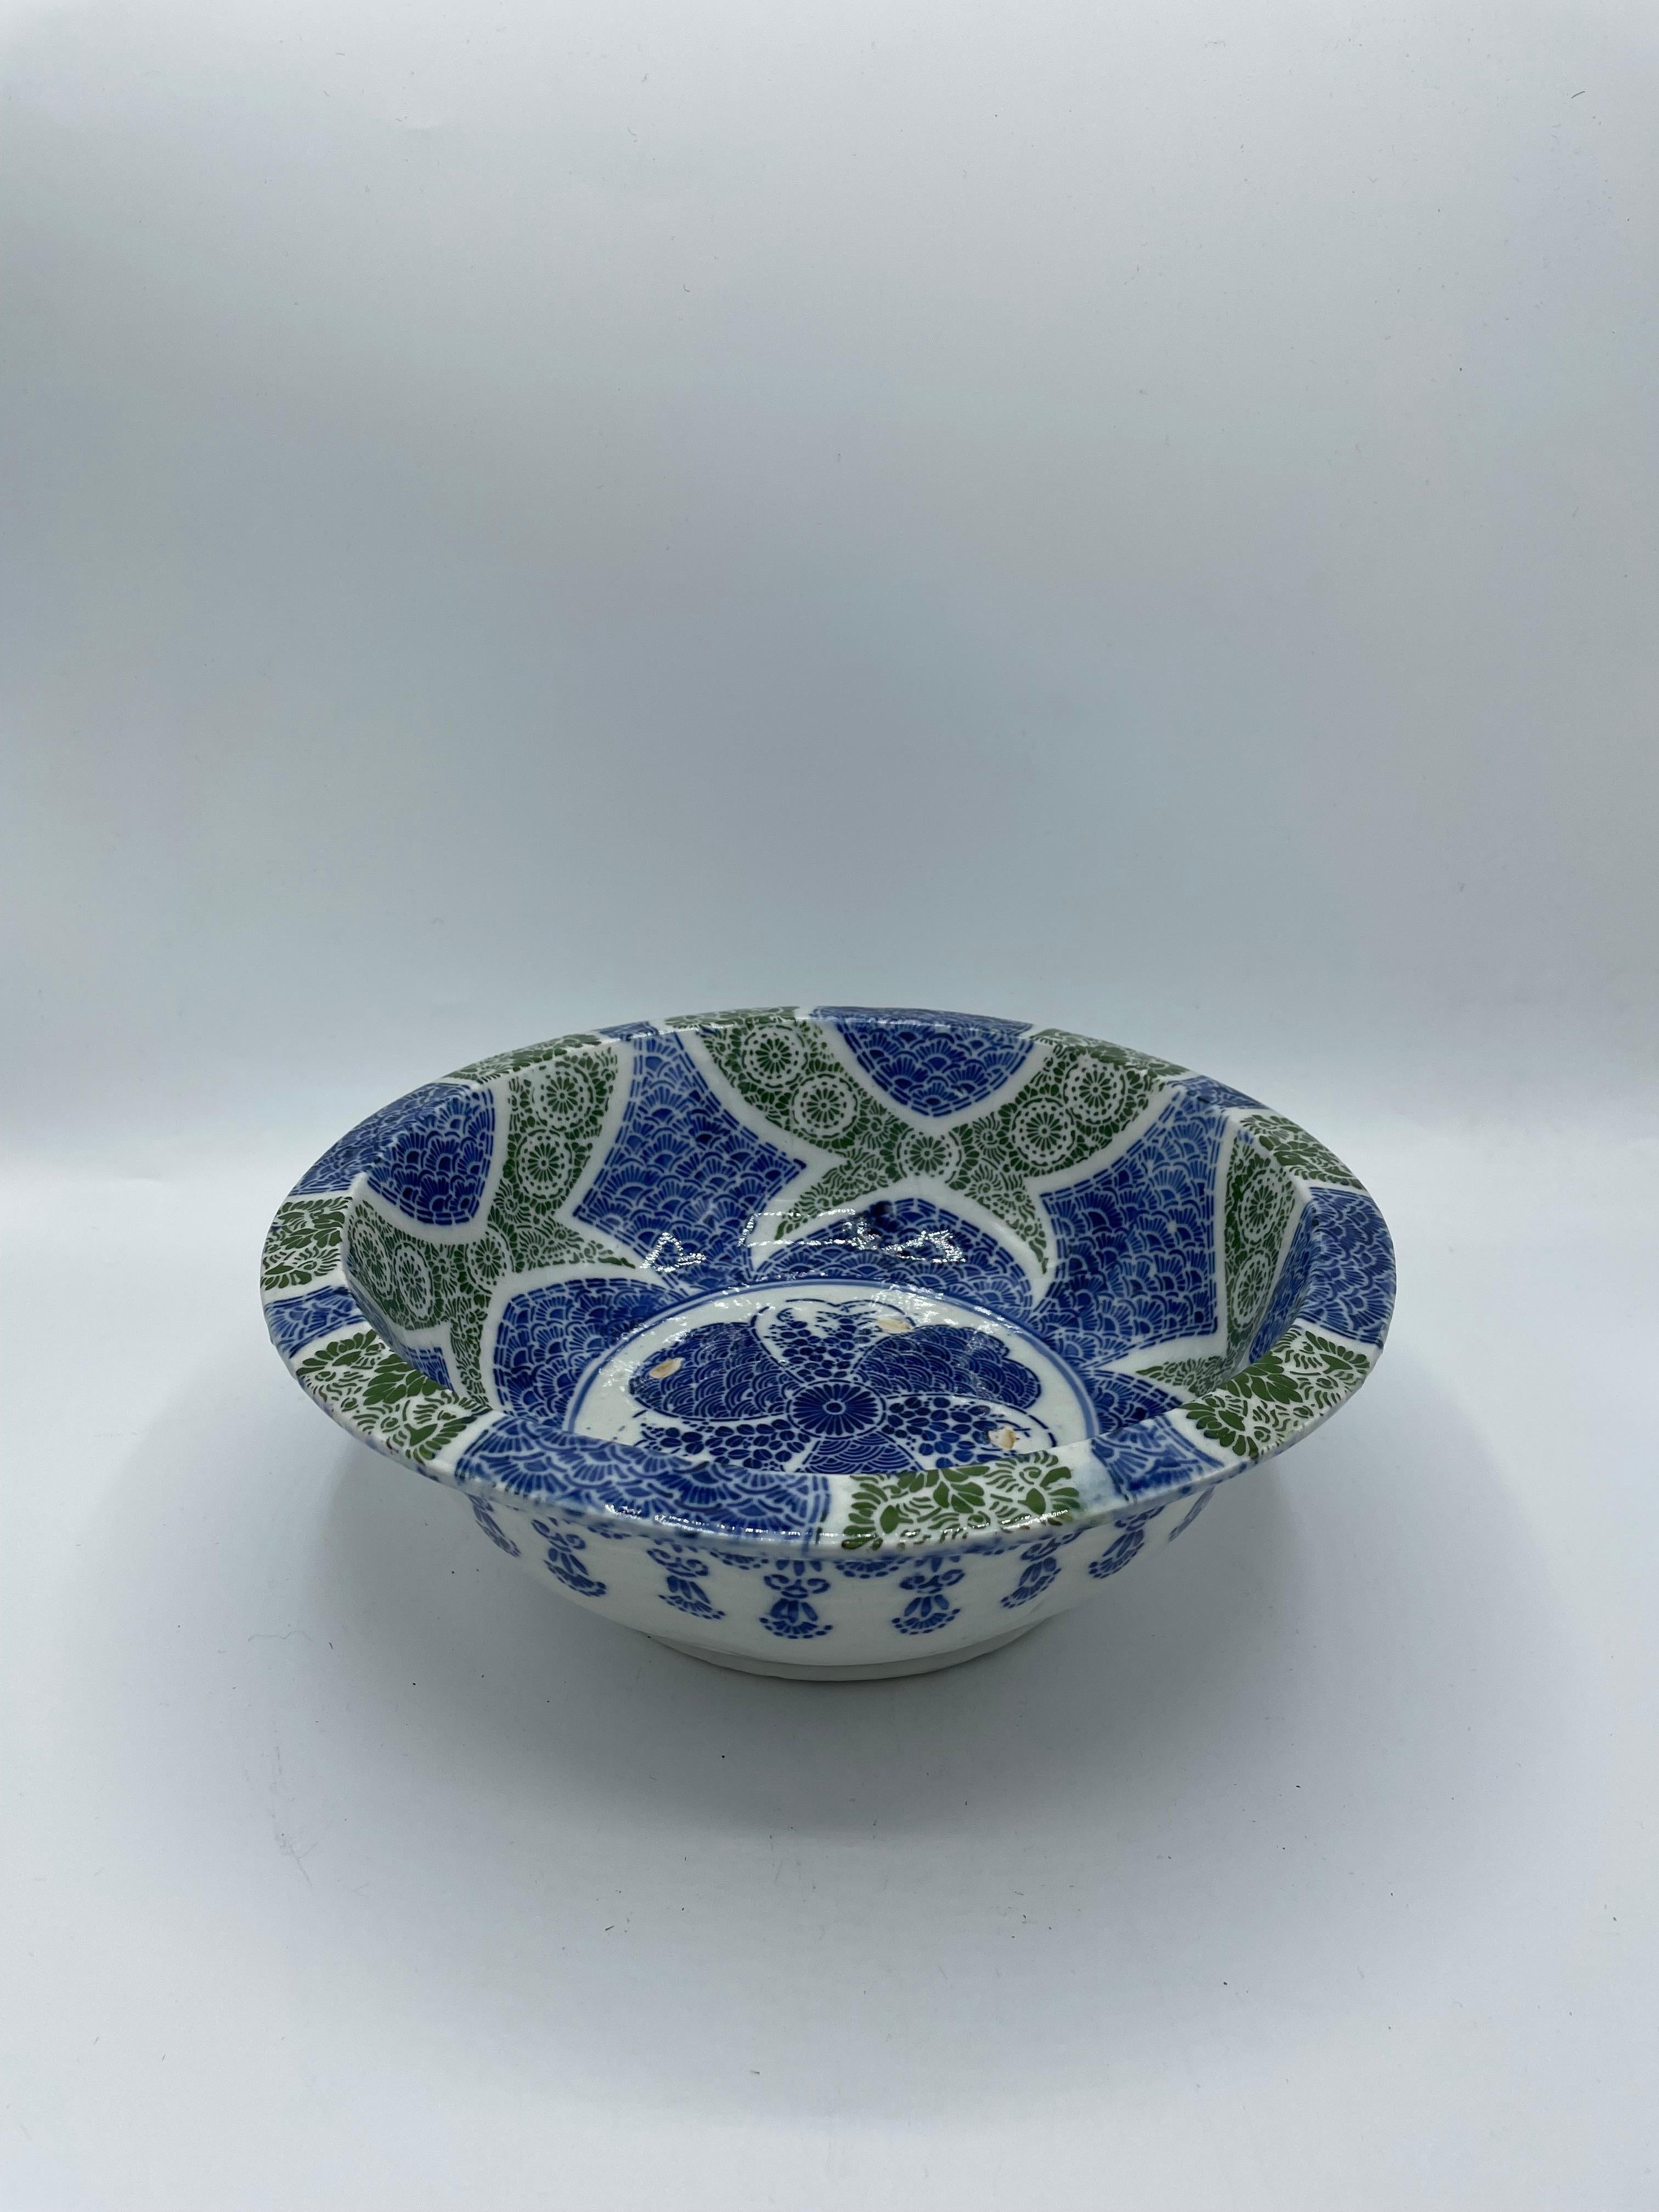 Antique Japanese Blue and Green Serving Bowl 1920s Taisho era In Fair Condition For Sale In Paris, FR